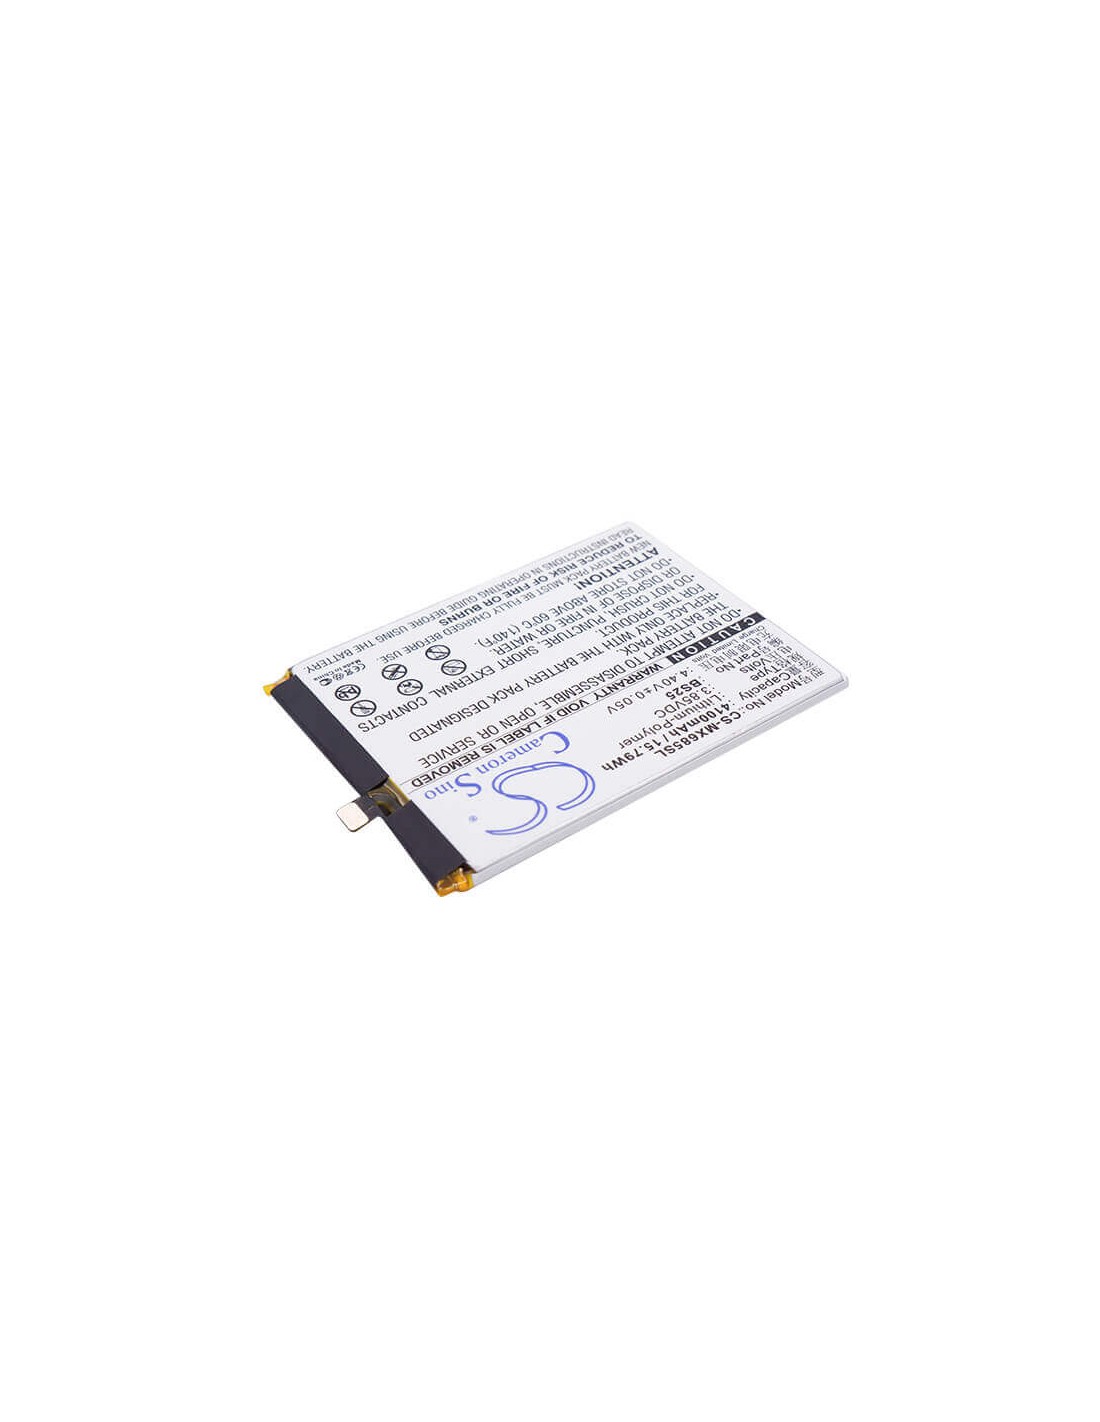 Battery for Meizu, M3 Max, Meilan Max, S685m 3.85V, 4100mAh - 15.79Wh